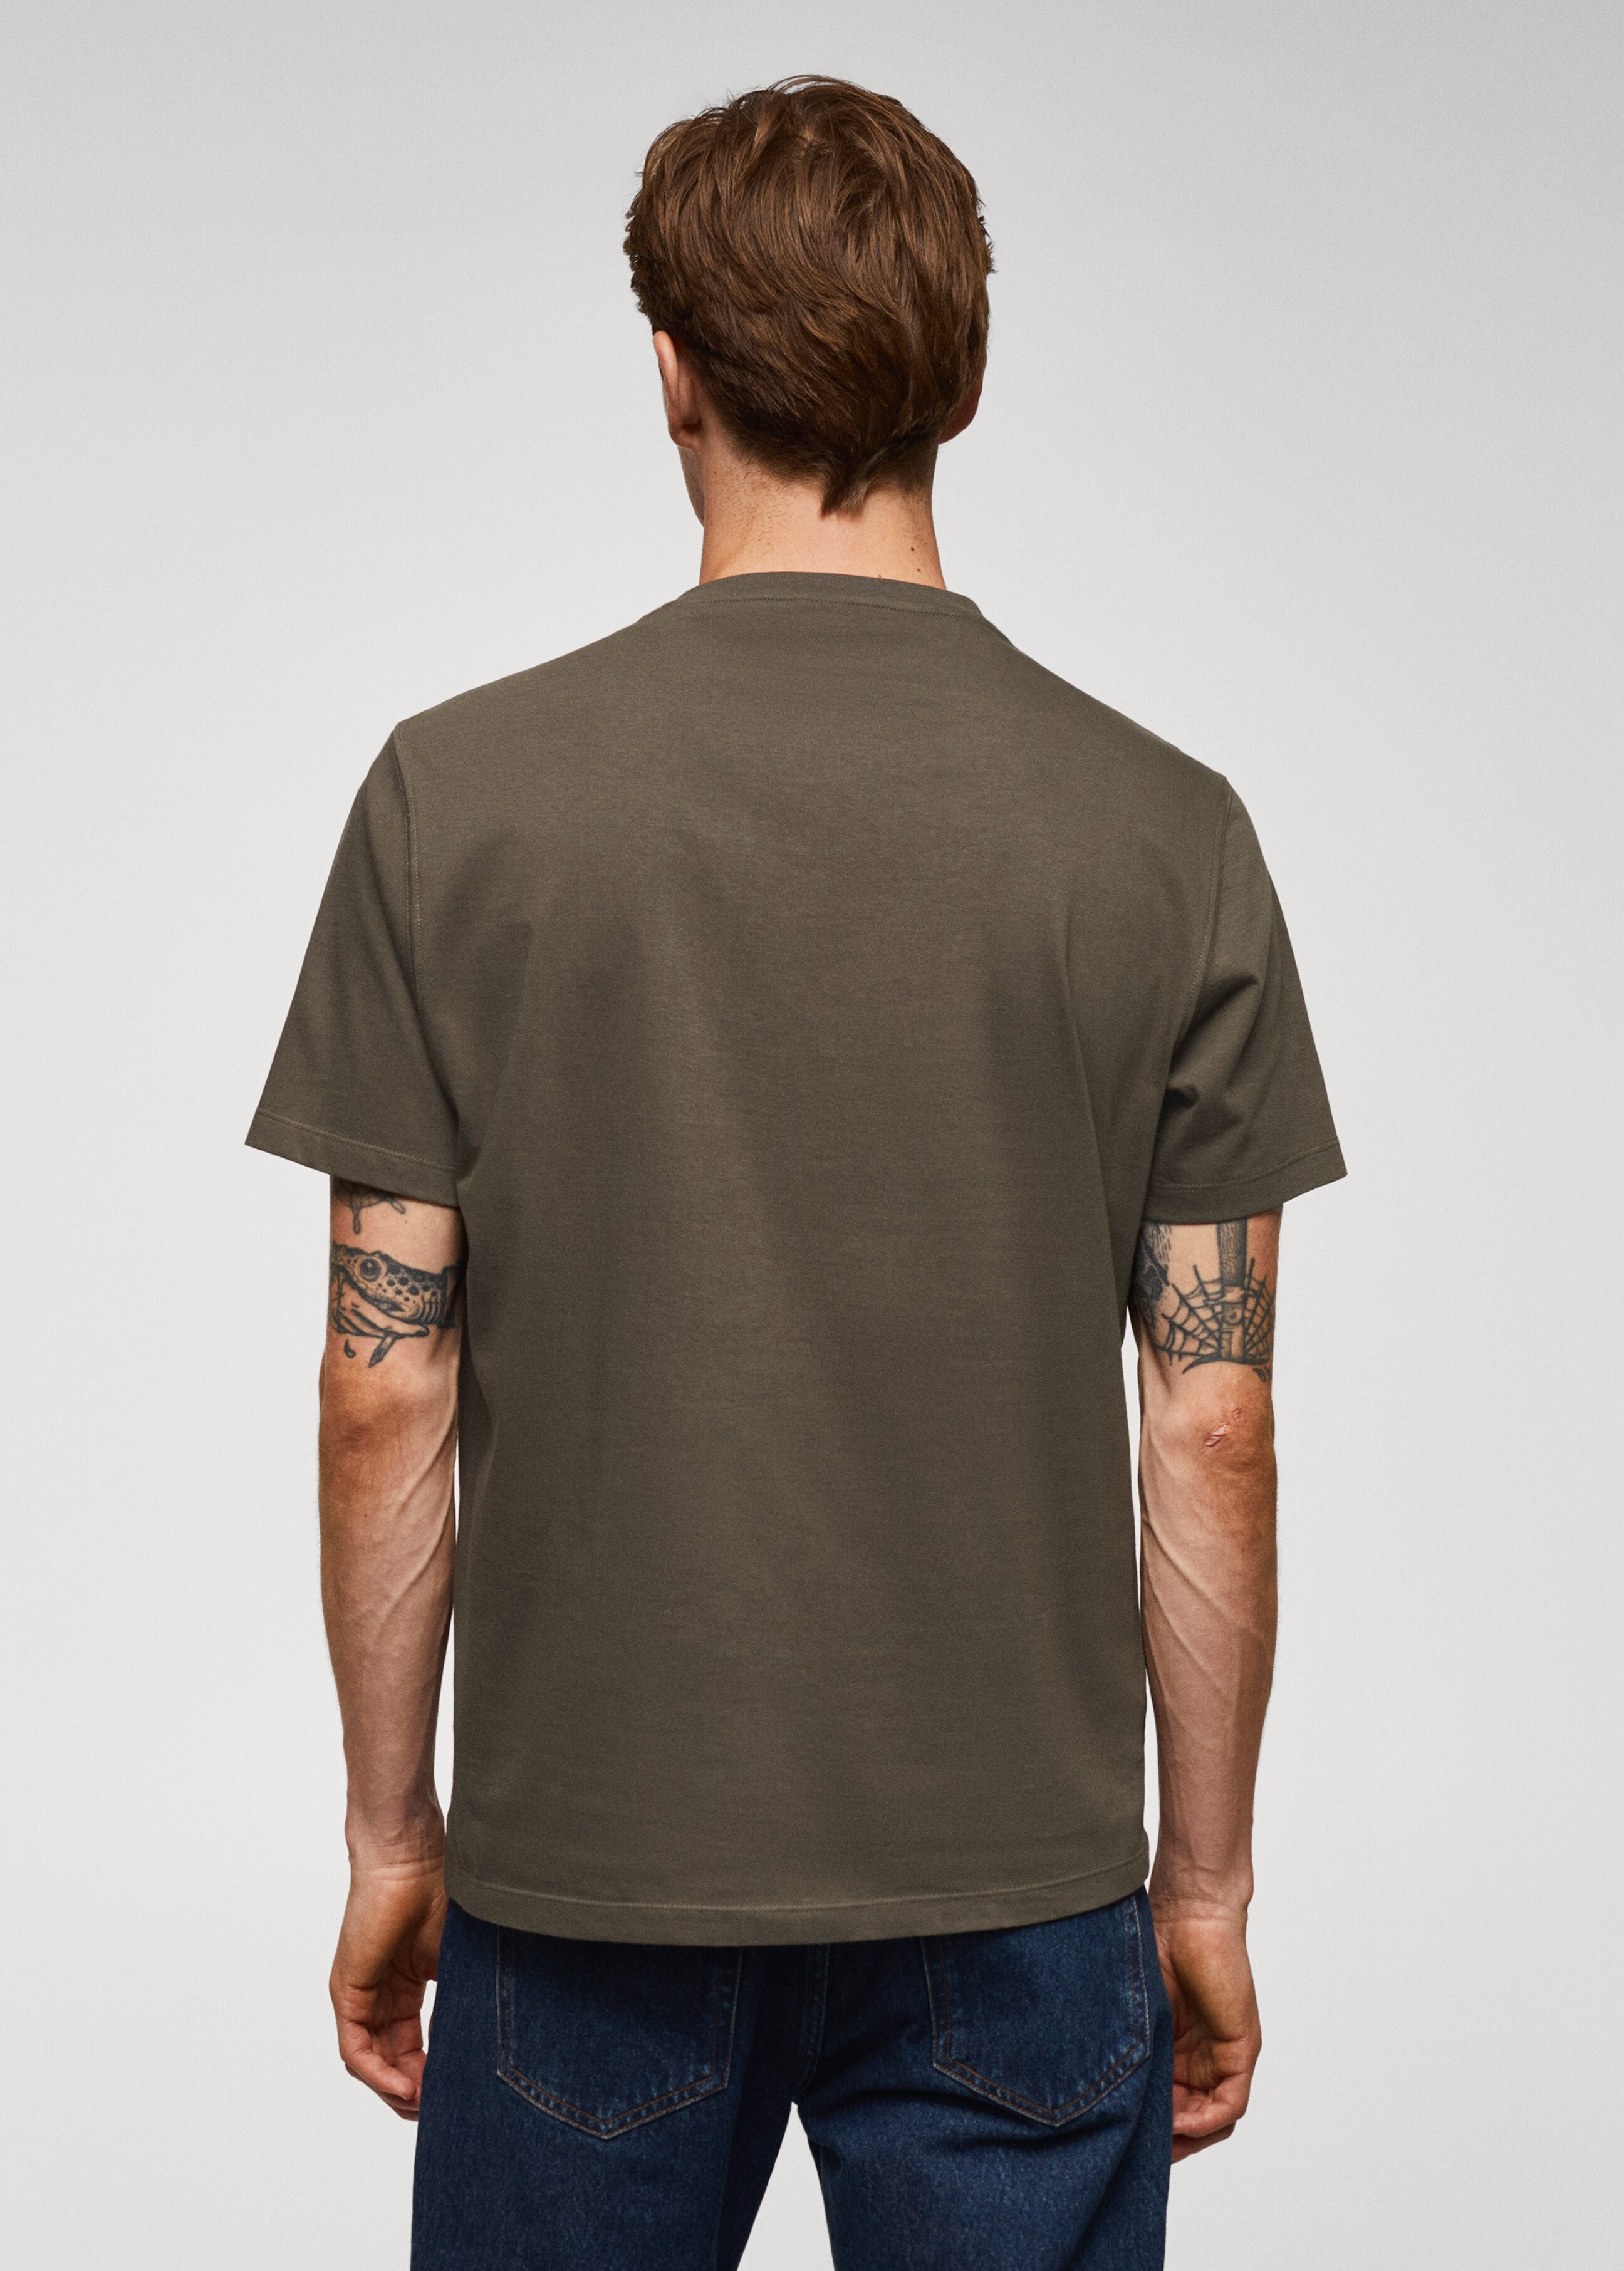 100% cotton printed t-shirt - Reverse of the article